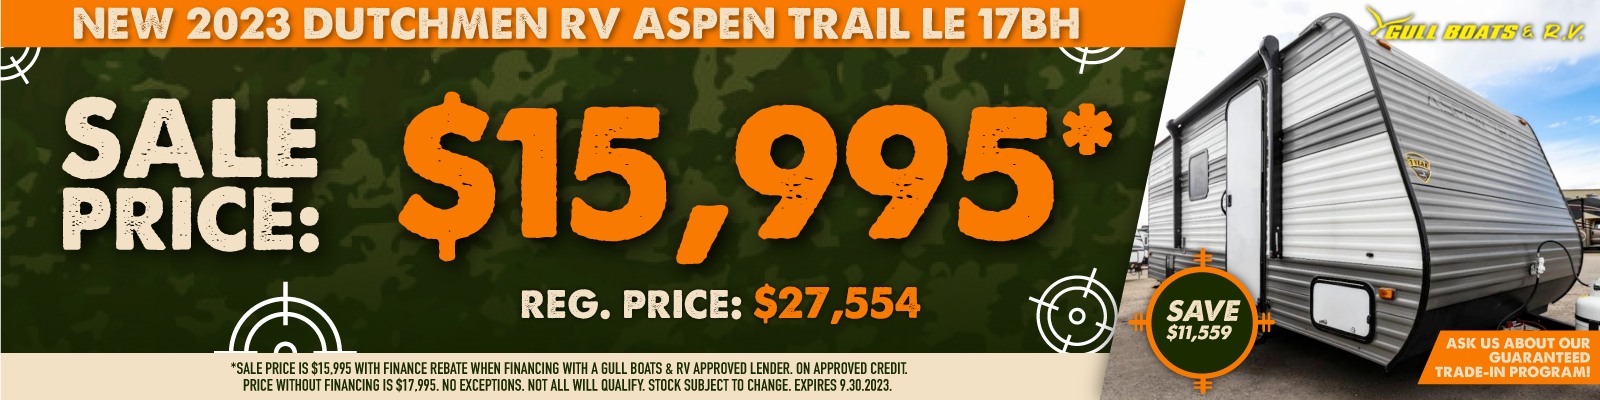 Aspen Trail LE 17BH starting at $15,995*